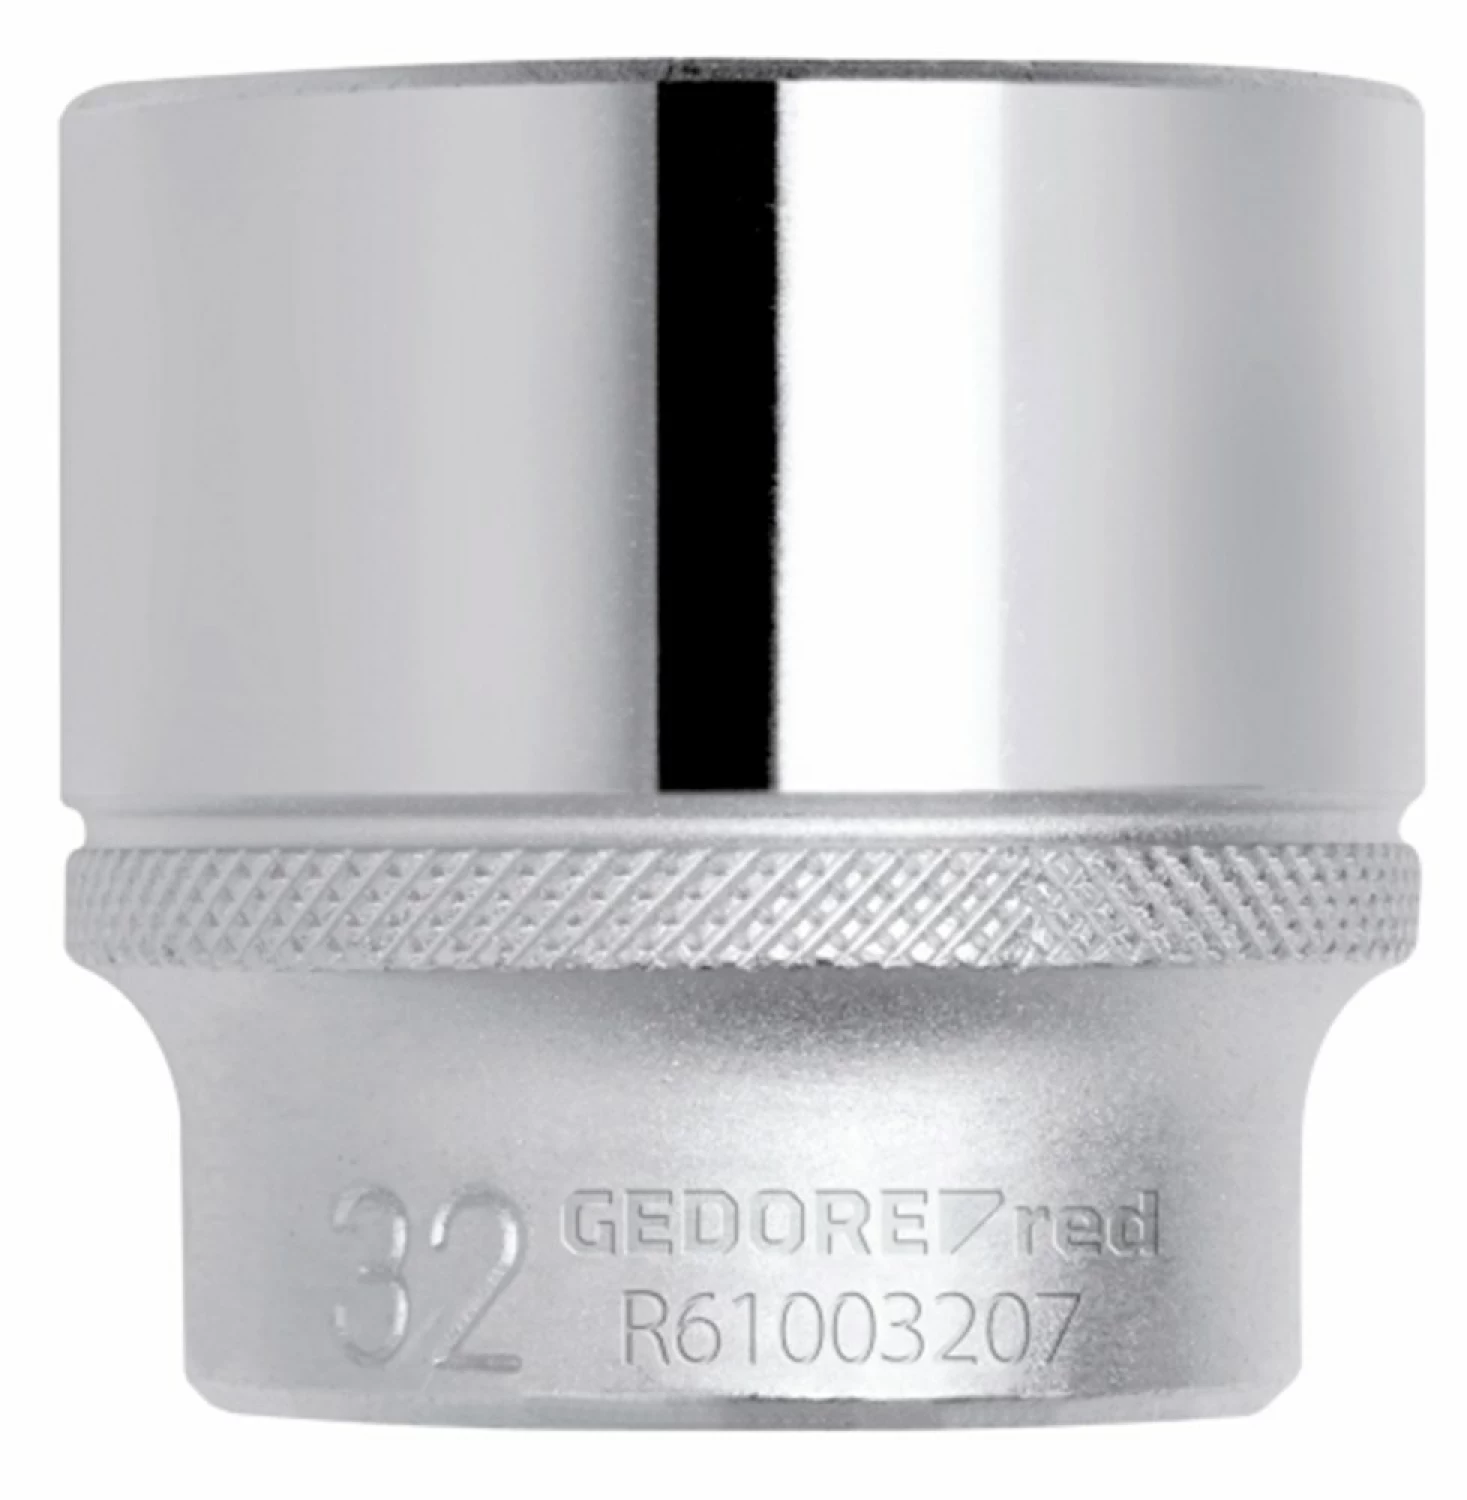 Gedore RED R61002206 Dopsleutel - 1/2" - 22 x 38mm-image